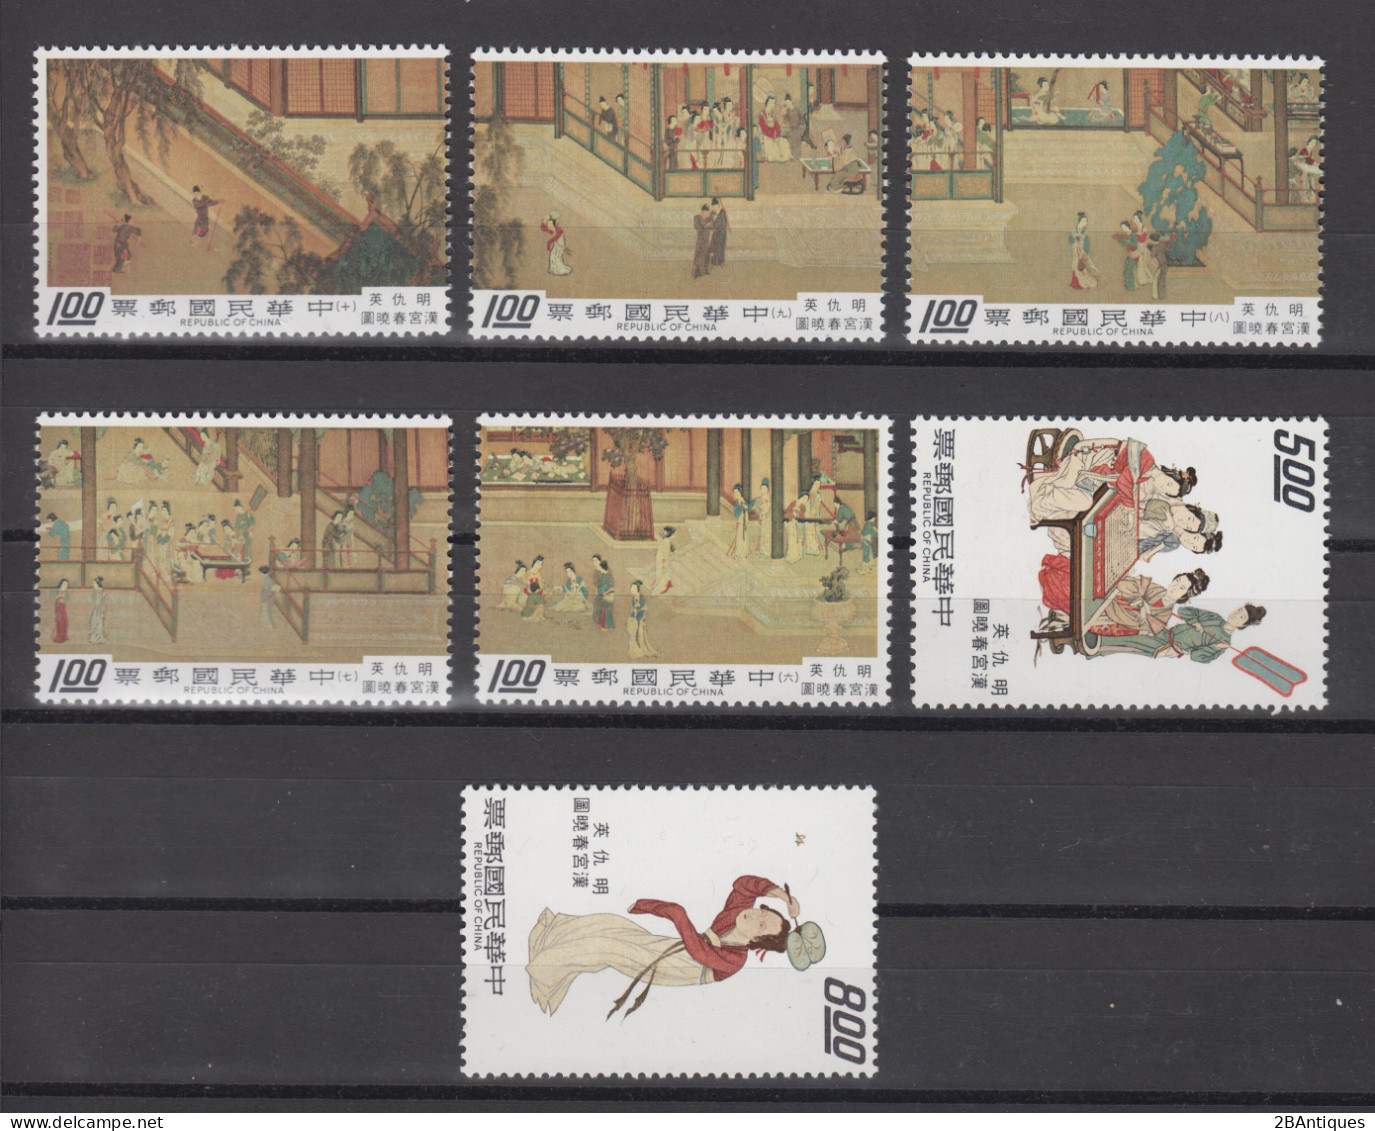 TAIWAN 1973 - "Spring Morning In The Han Palace" - Ming Dynasty Handscroll MNH** OG XF - Neufs